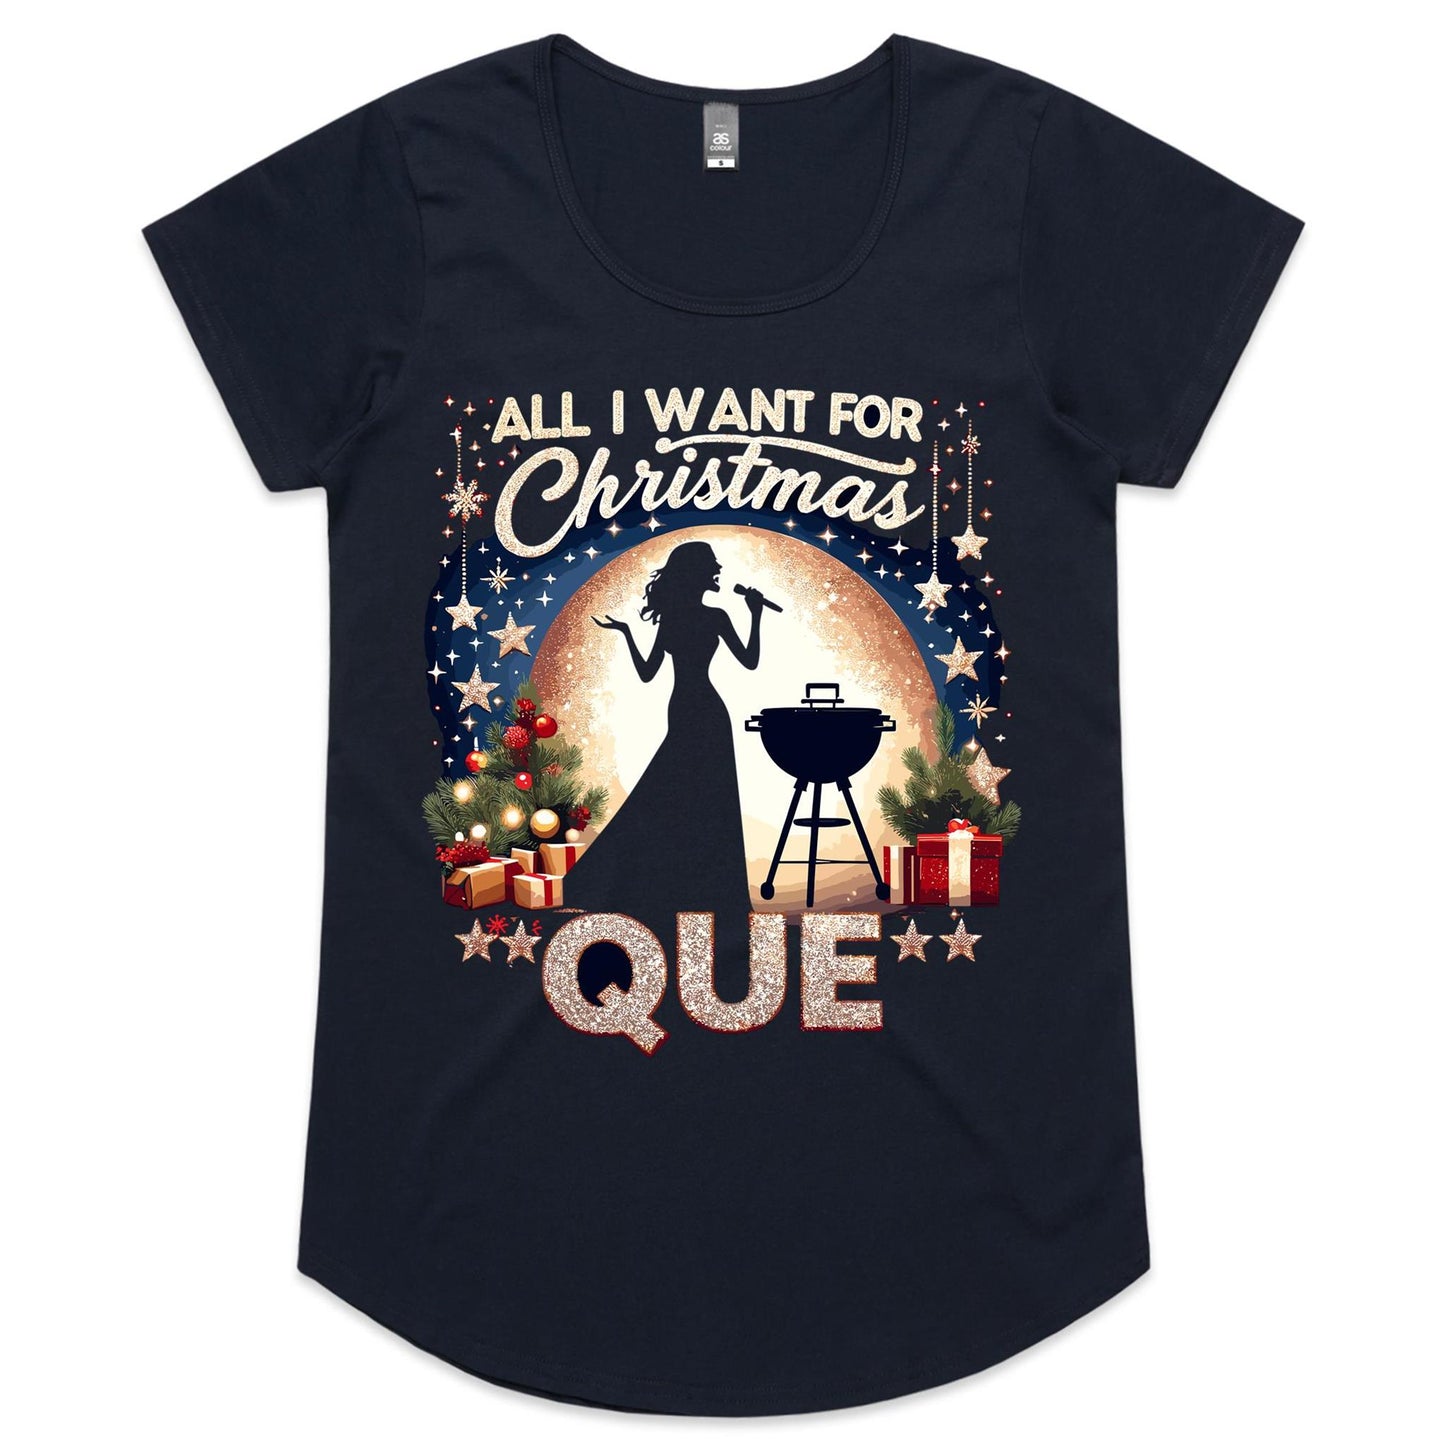 All I want for Christmas is QUE - Womens Scoop Neck T-Shirt